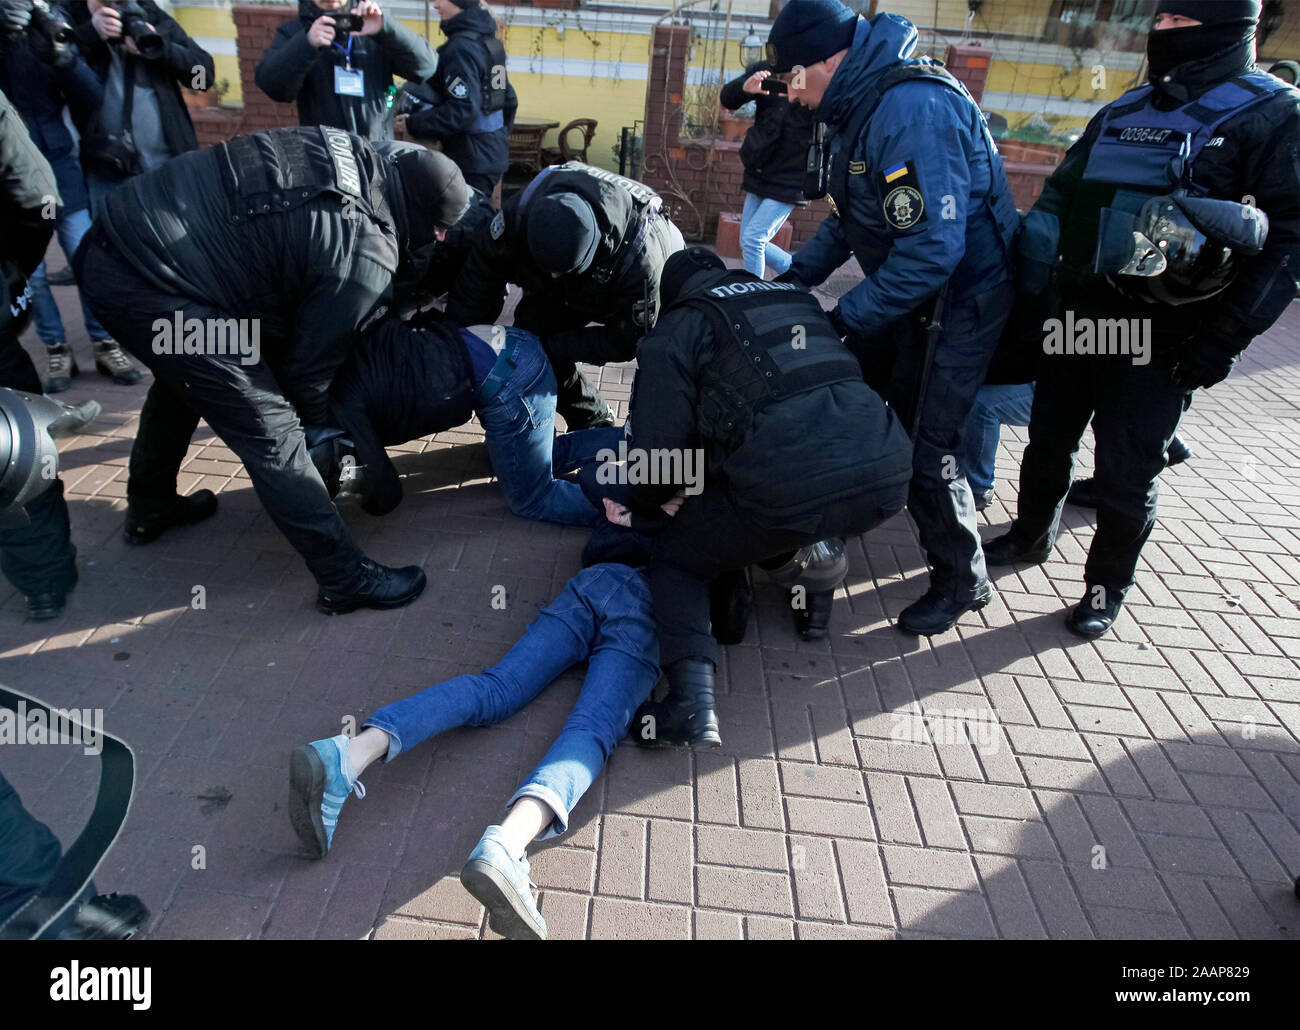 Policemen arrest far-right activists during the march.Transgender rights activists in Ukraine’s capital Kyiv held a march to mark Transgender Day of Remembrance. In 2018, the police failed to protect those participating in a similar march from attacks by violent groups advocating hatred and discrimination. This year, there is a serious risk of new attacks and the police must ensure people can safely exercise their rights to freedom of peaceful assembly and expression without discrimination. Stock Photo